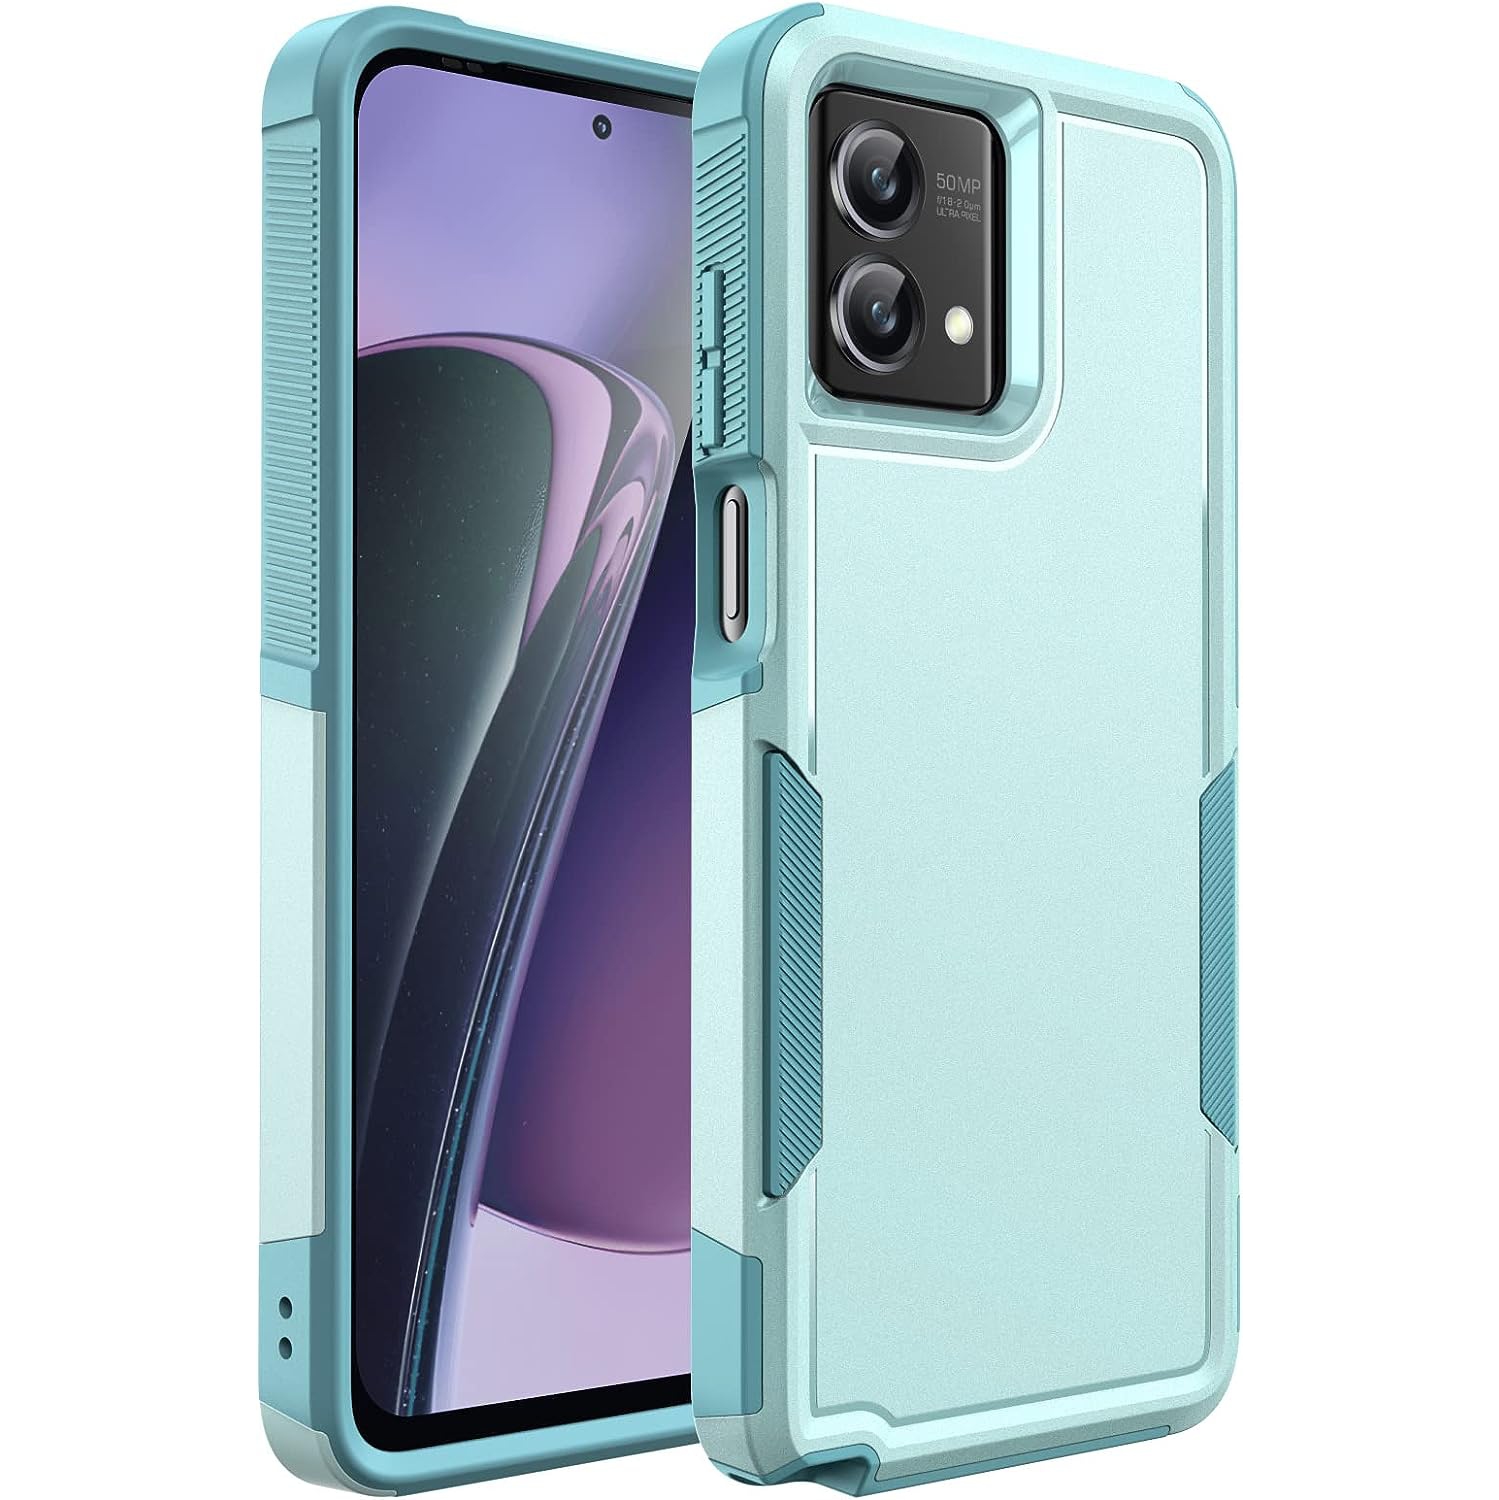 【CSmart】 Dual Layers Heavy Duty Rubber Armor Hard Case Cover for Motorola Moto G Stylus 5G 2023, Teal